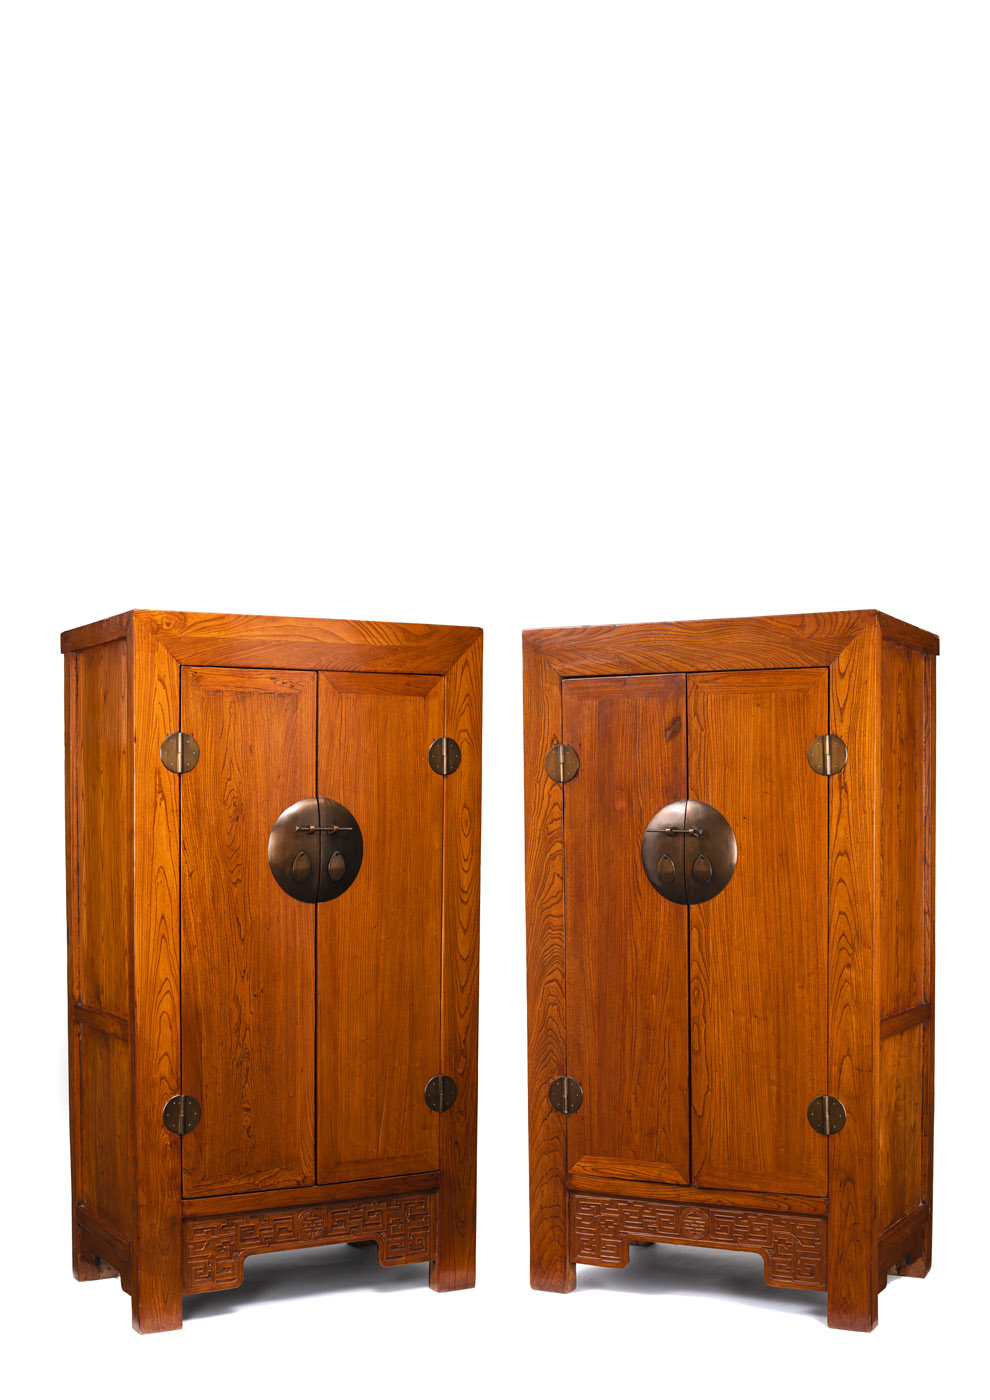 A PAIR OF WOODEN CABINETS WITH BRONZE FITTINGS, THE LOWER APRONS CARVED WIITH 'SHOU' CHARACTERS AND